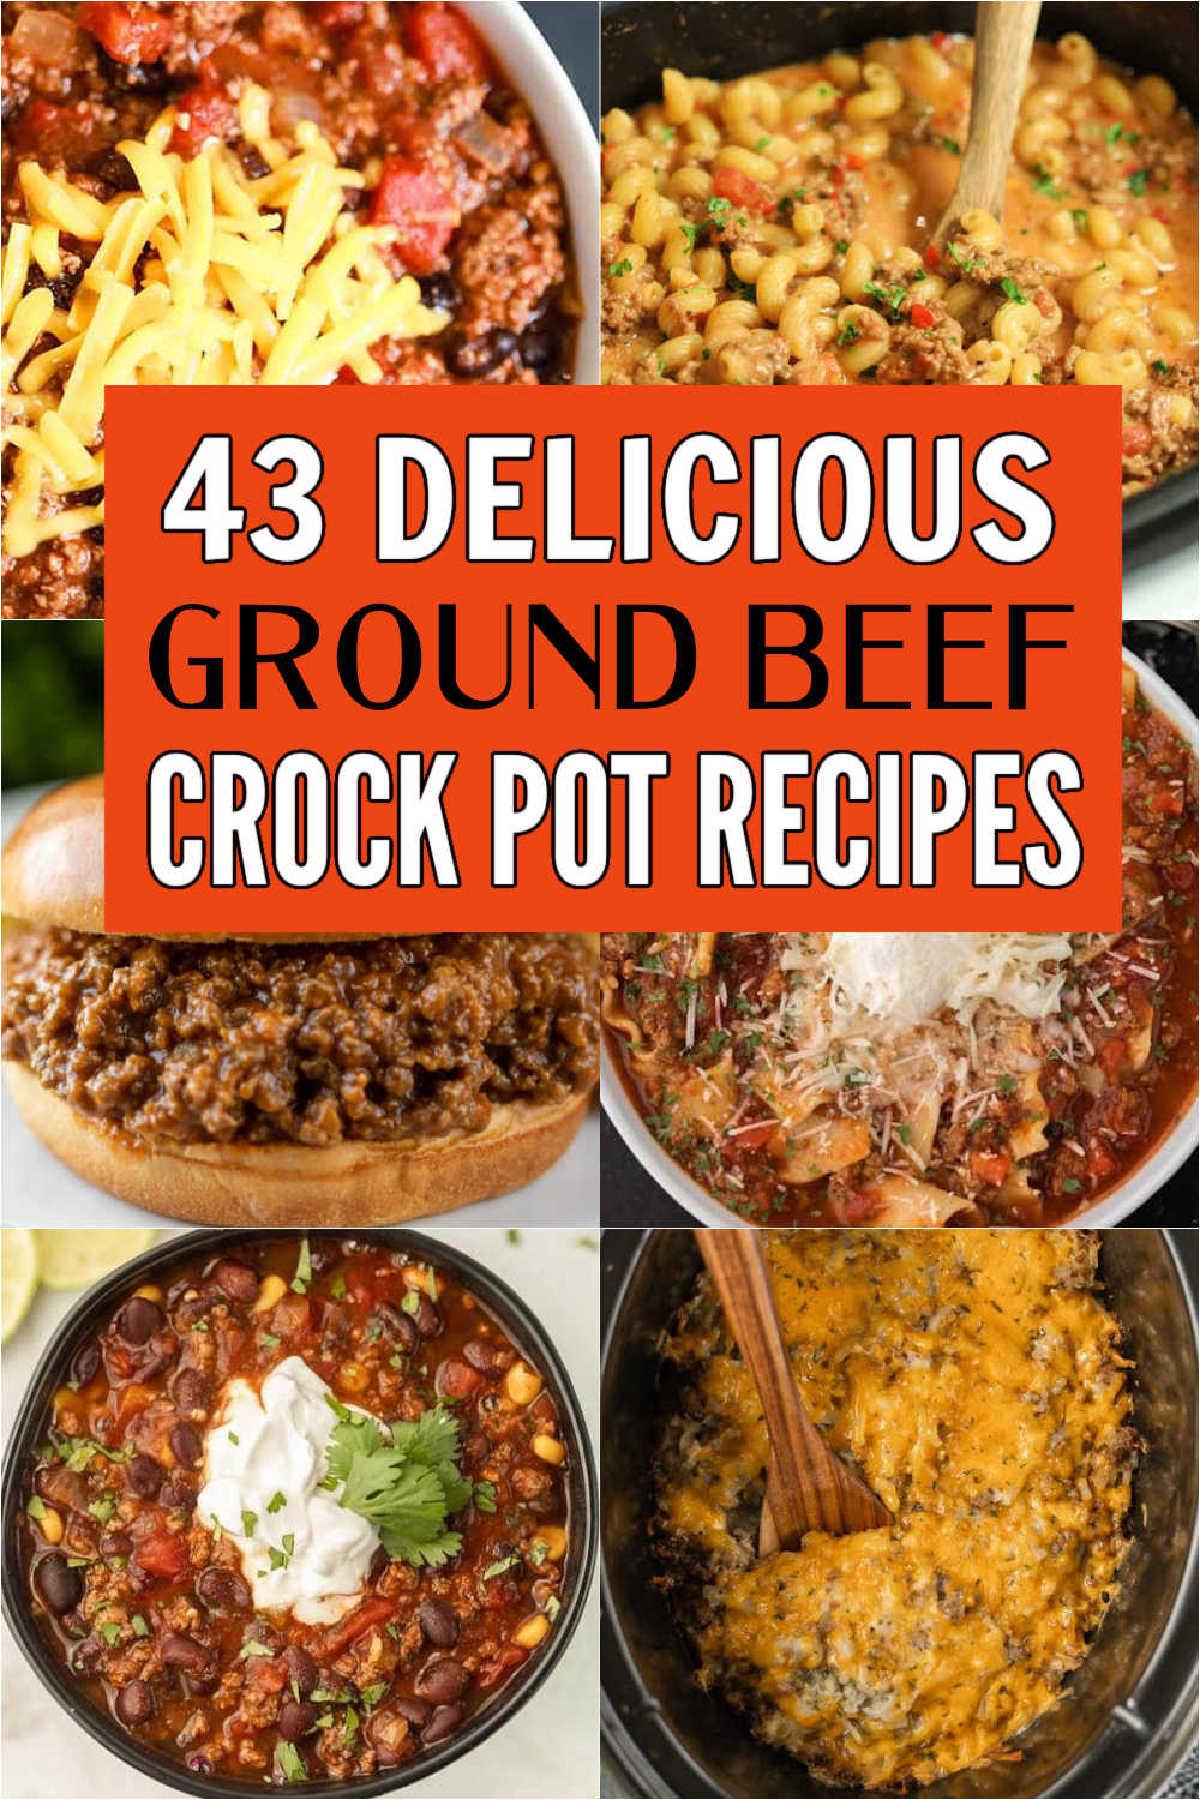 Try these easy Ground beef crock pot recipes for a busy nights. Lots of amazing ideas from casseroles and soup to meatloaf and more. These crock pot ground beef recipes are great for dinner and are healthy too!  You’ll love this easy entrees ideas. #eatingonadime #crockpotrecipes #slowcookerrecipes #groundbeefrecipes #beefrecipes 
